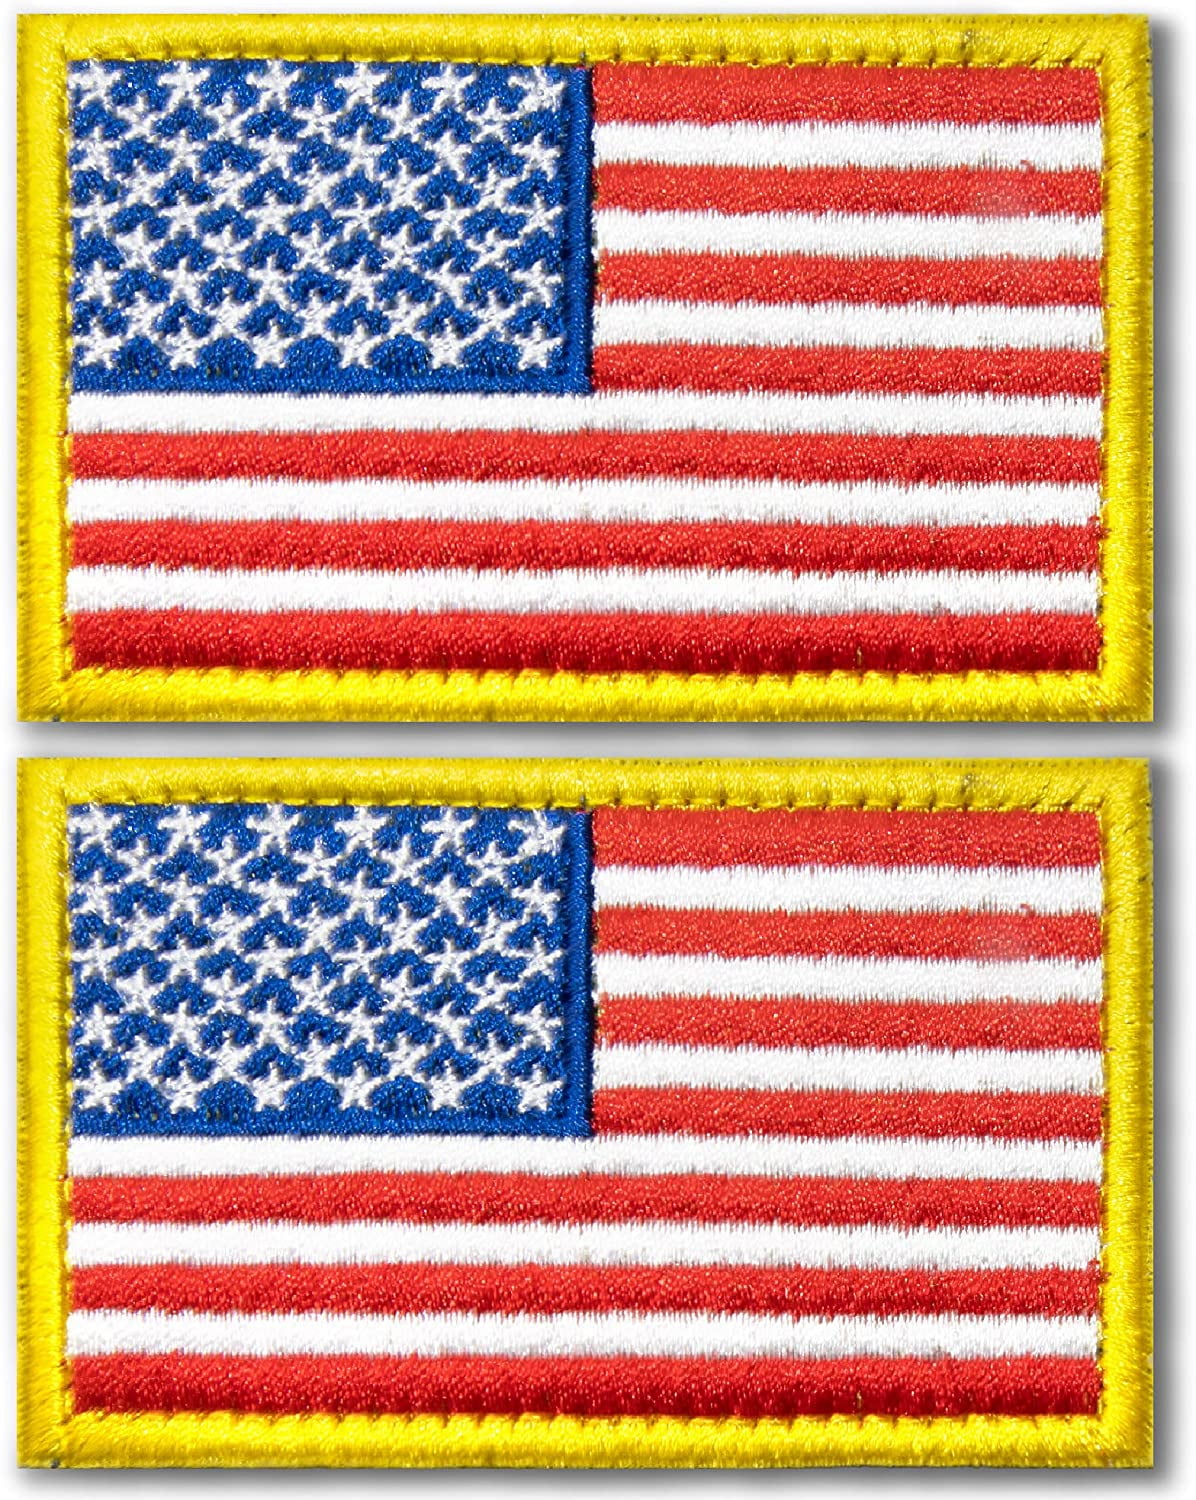 Veteran USA Flag Embroidered Applique Iron-On/Hook & Loop Patch 3.75" x 2.25"